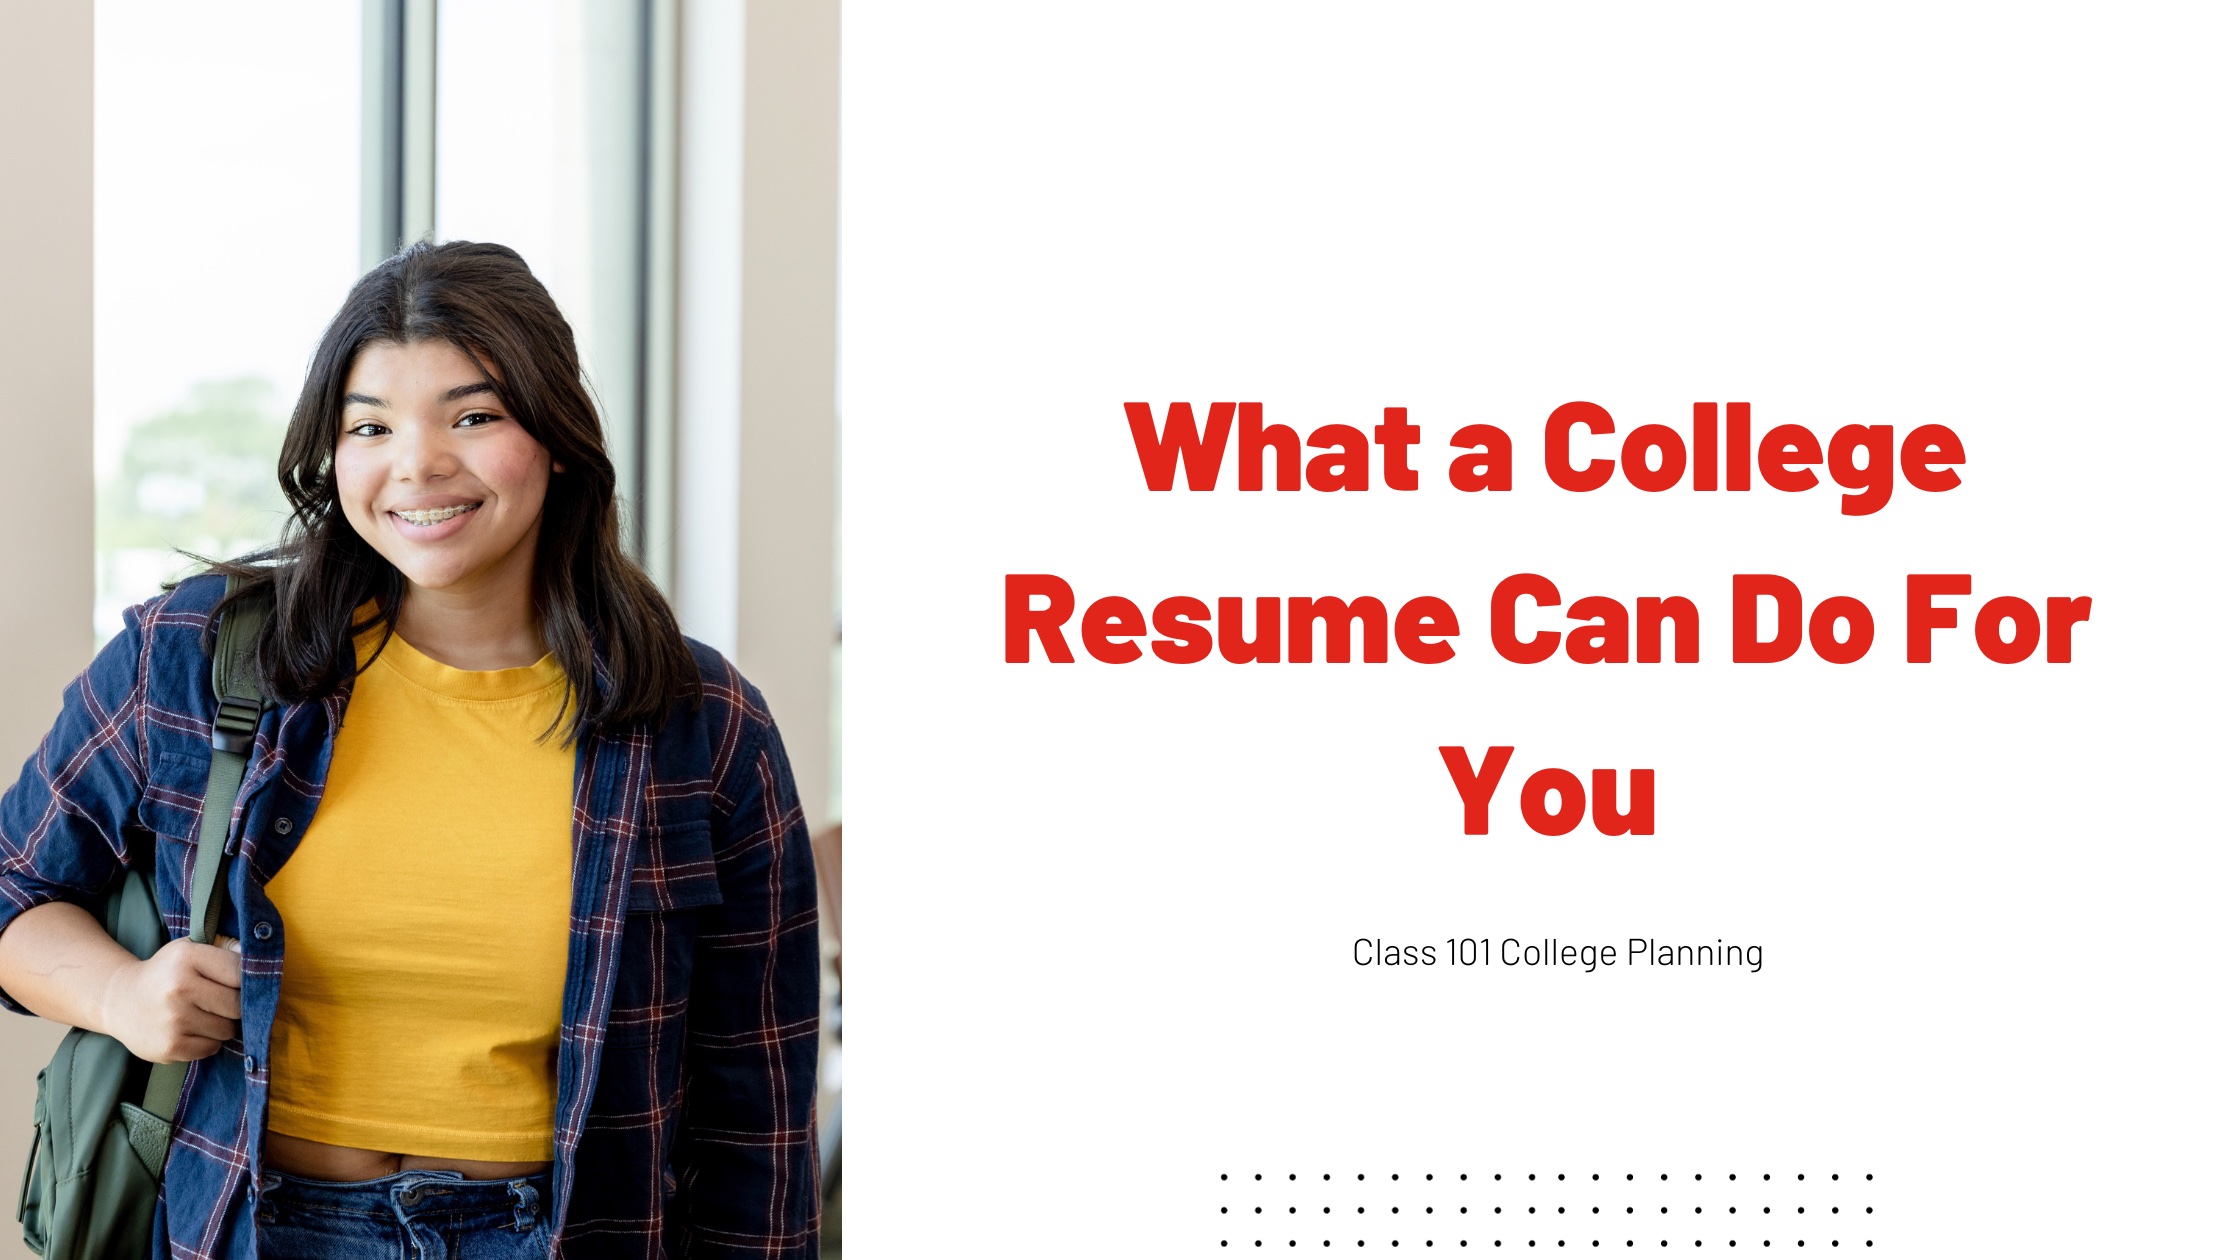 Professional College Resume Services